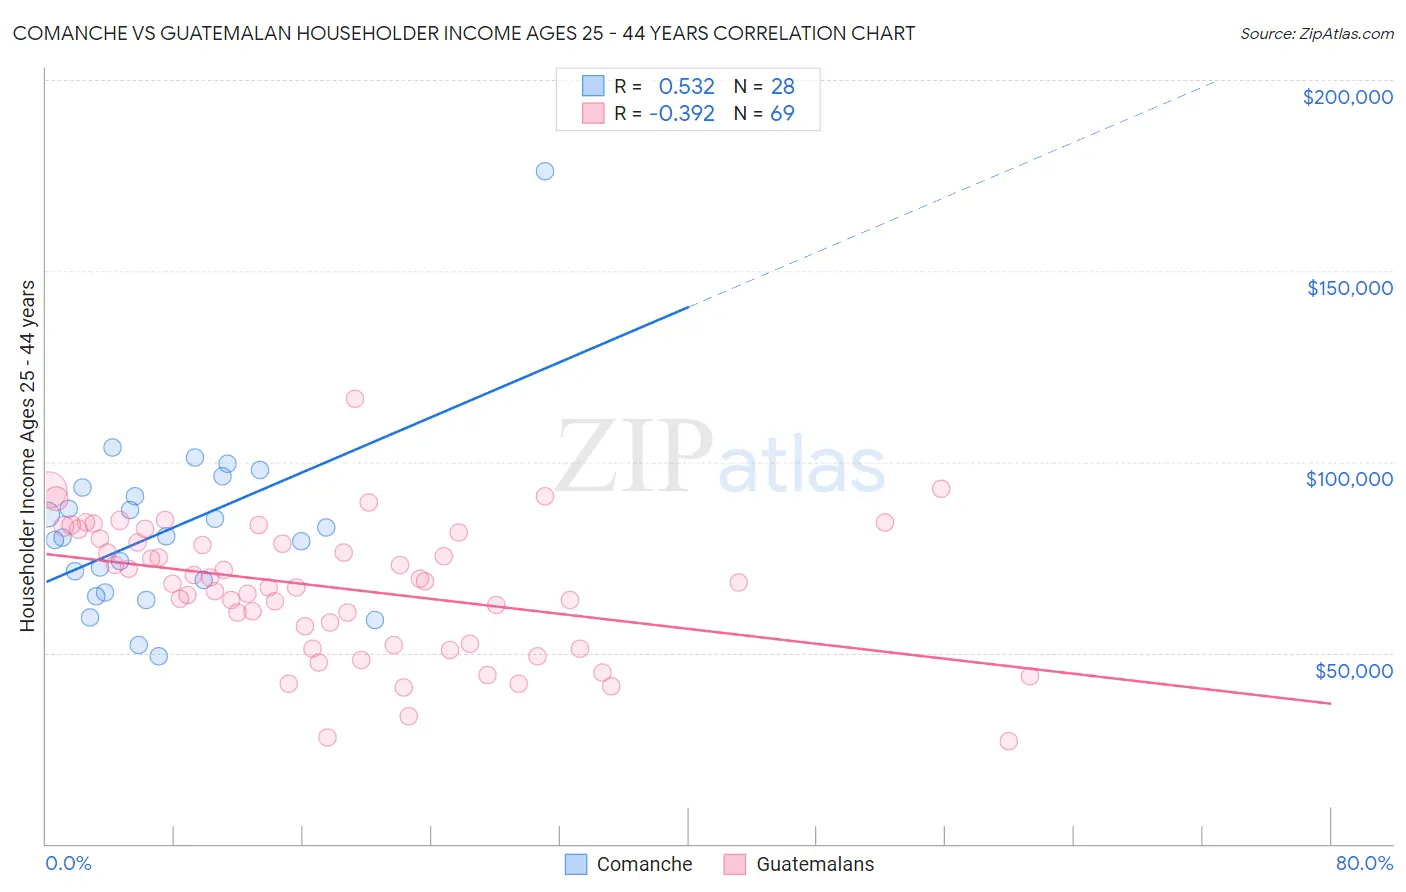 Comanche vs Guatemalan Householder Income Ages 25 - 44 years